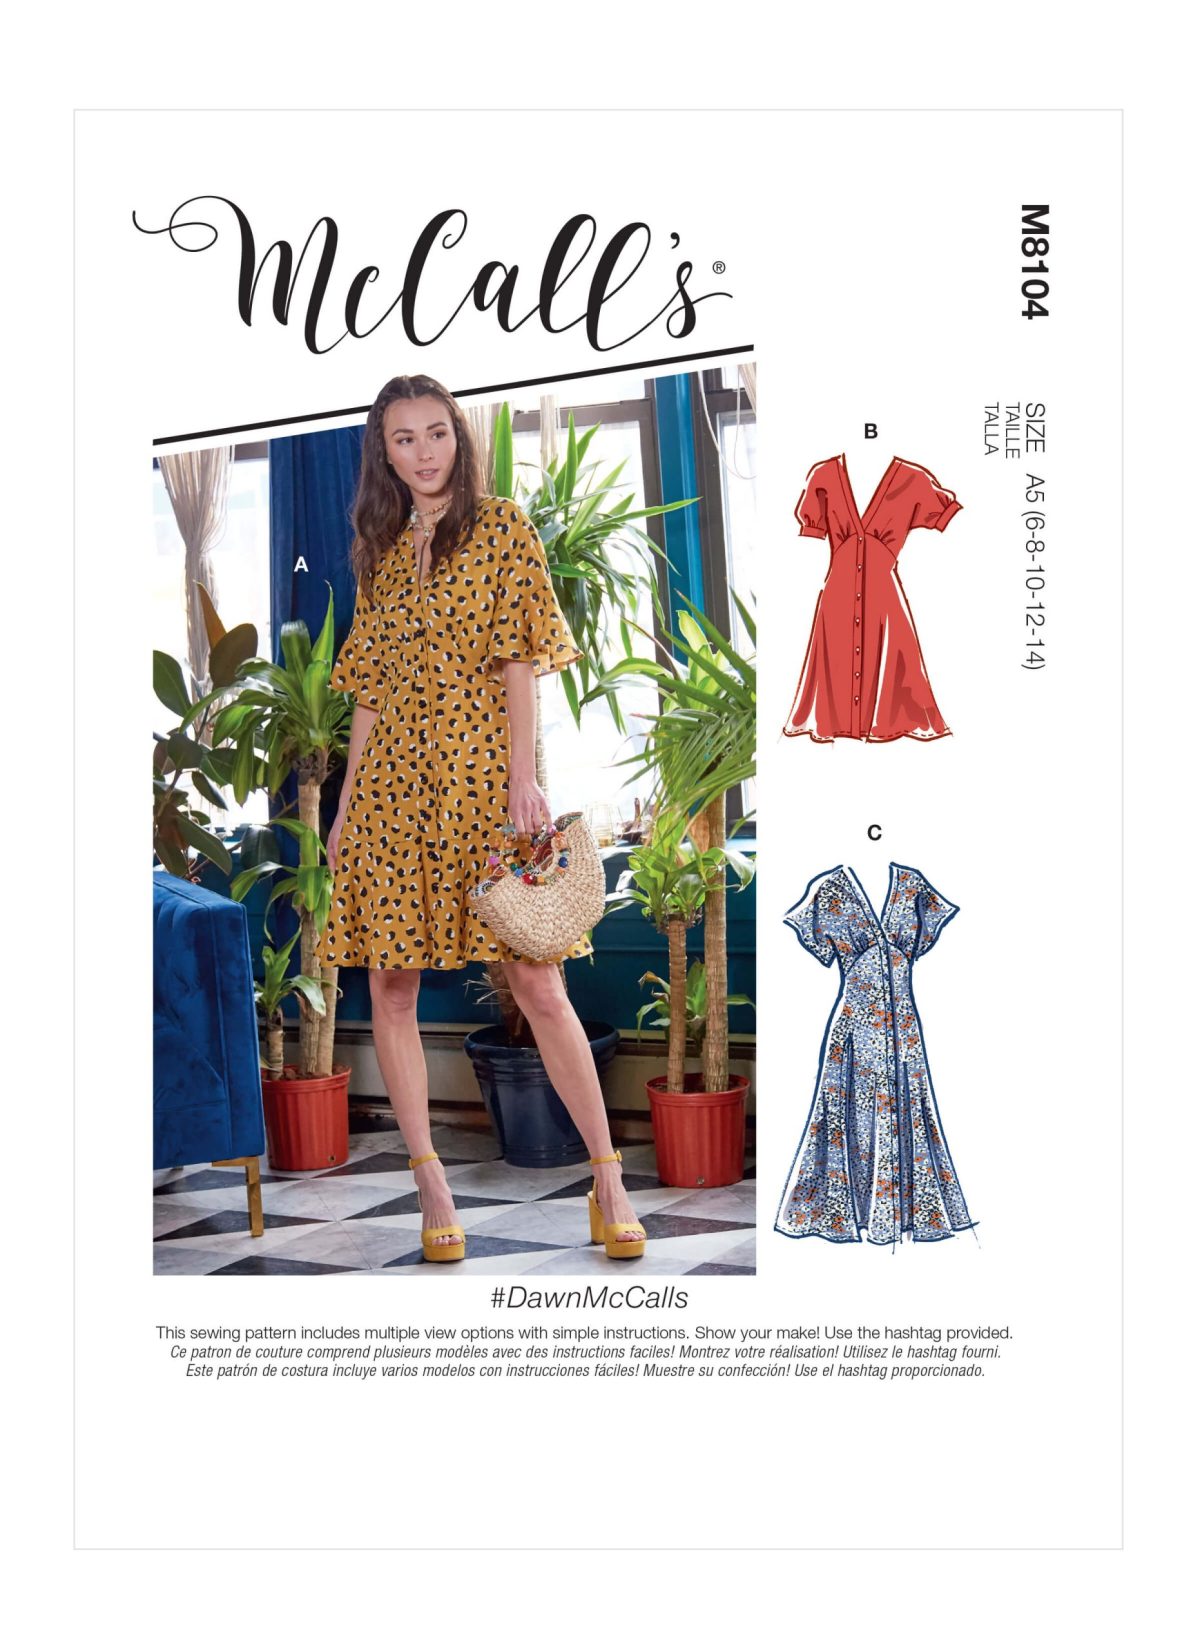 McCall's Sewing Pattern M8104 Misses' Dresses. #DawnMcCalls